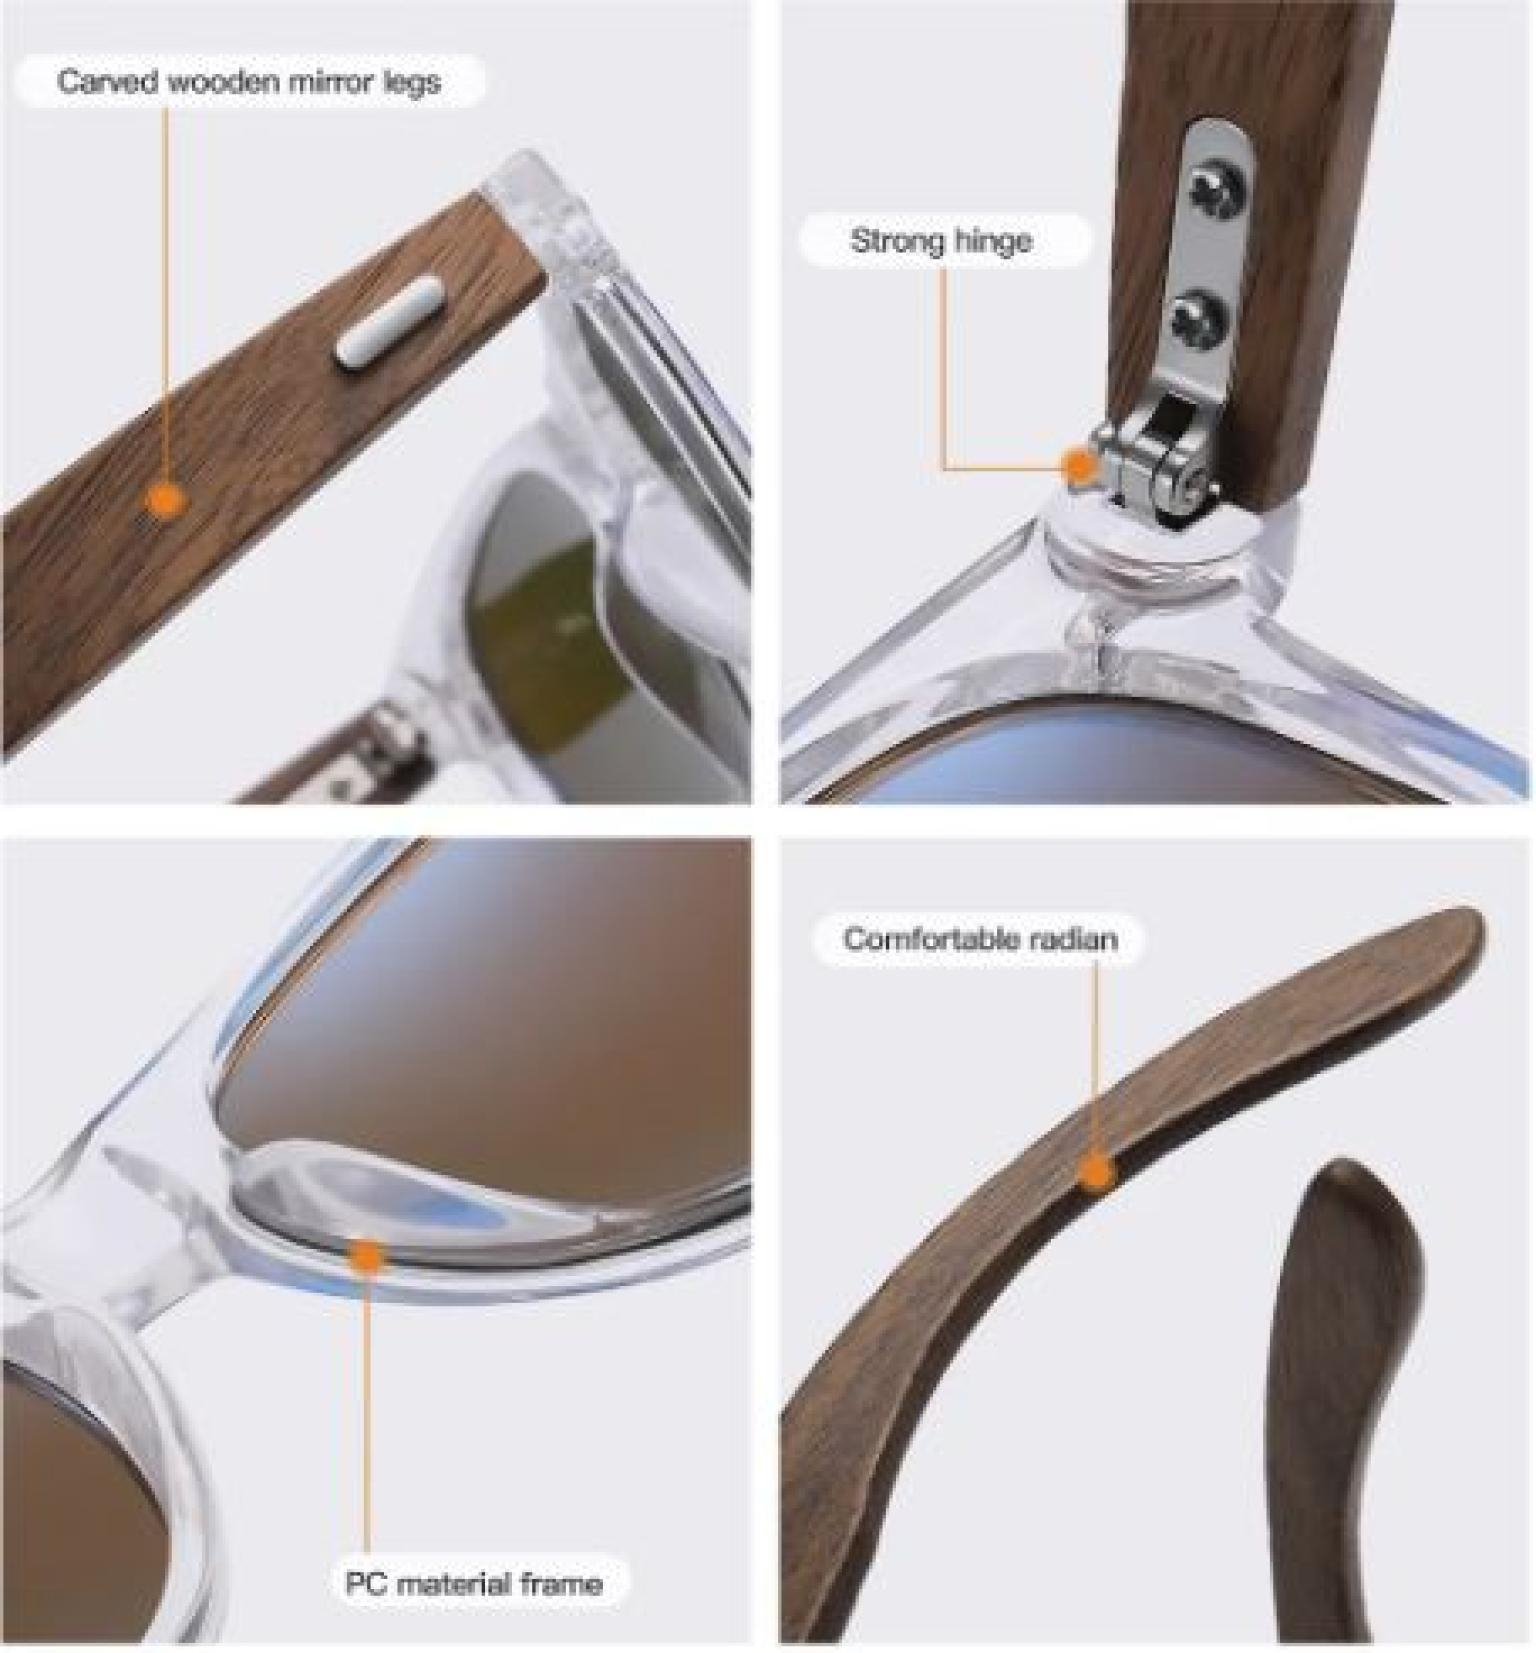 New Brand Transparent Color Frames Handmade Wood Sunglasses Men Women's Polarized Delicate Fashion With Wooden Box